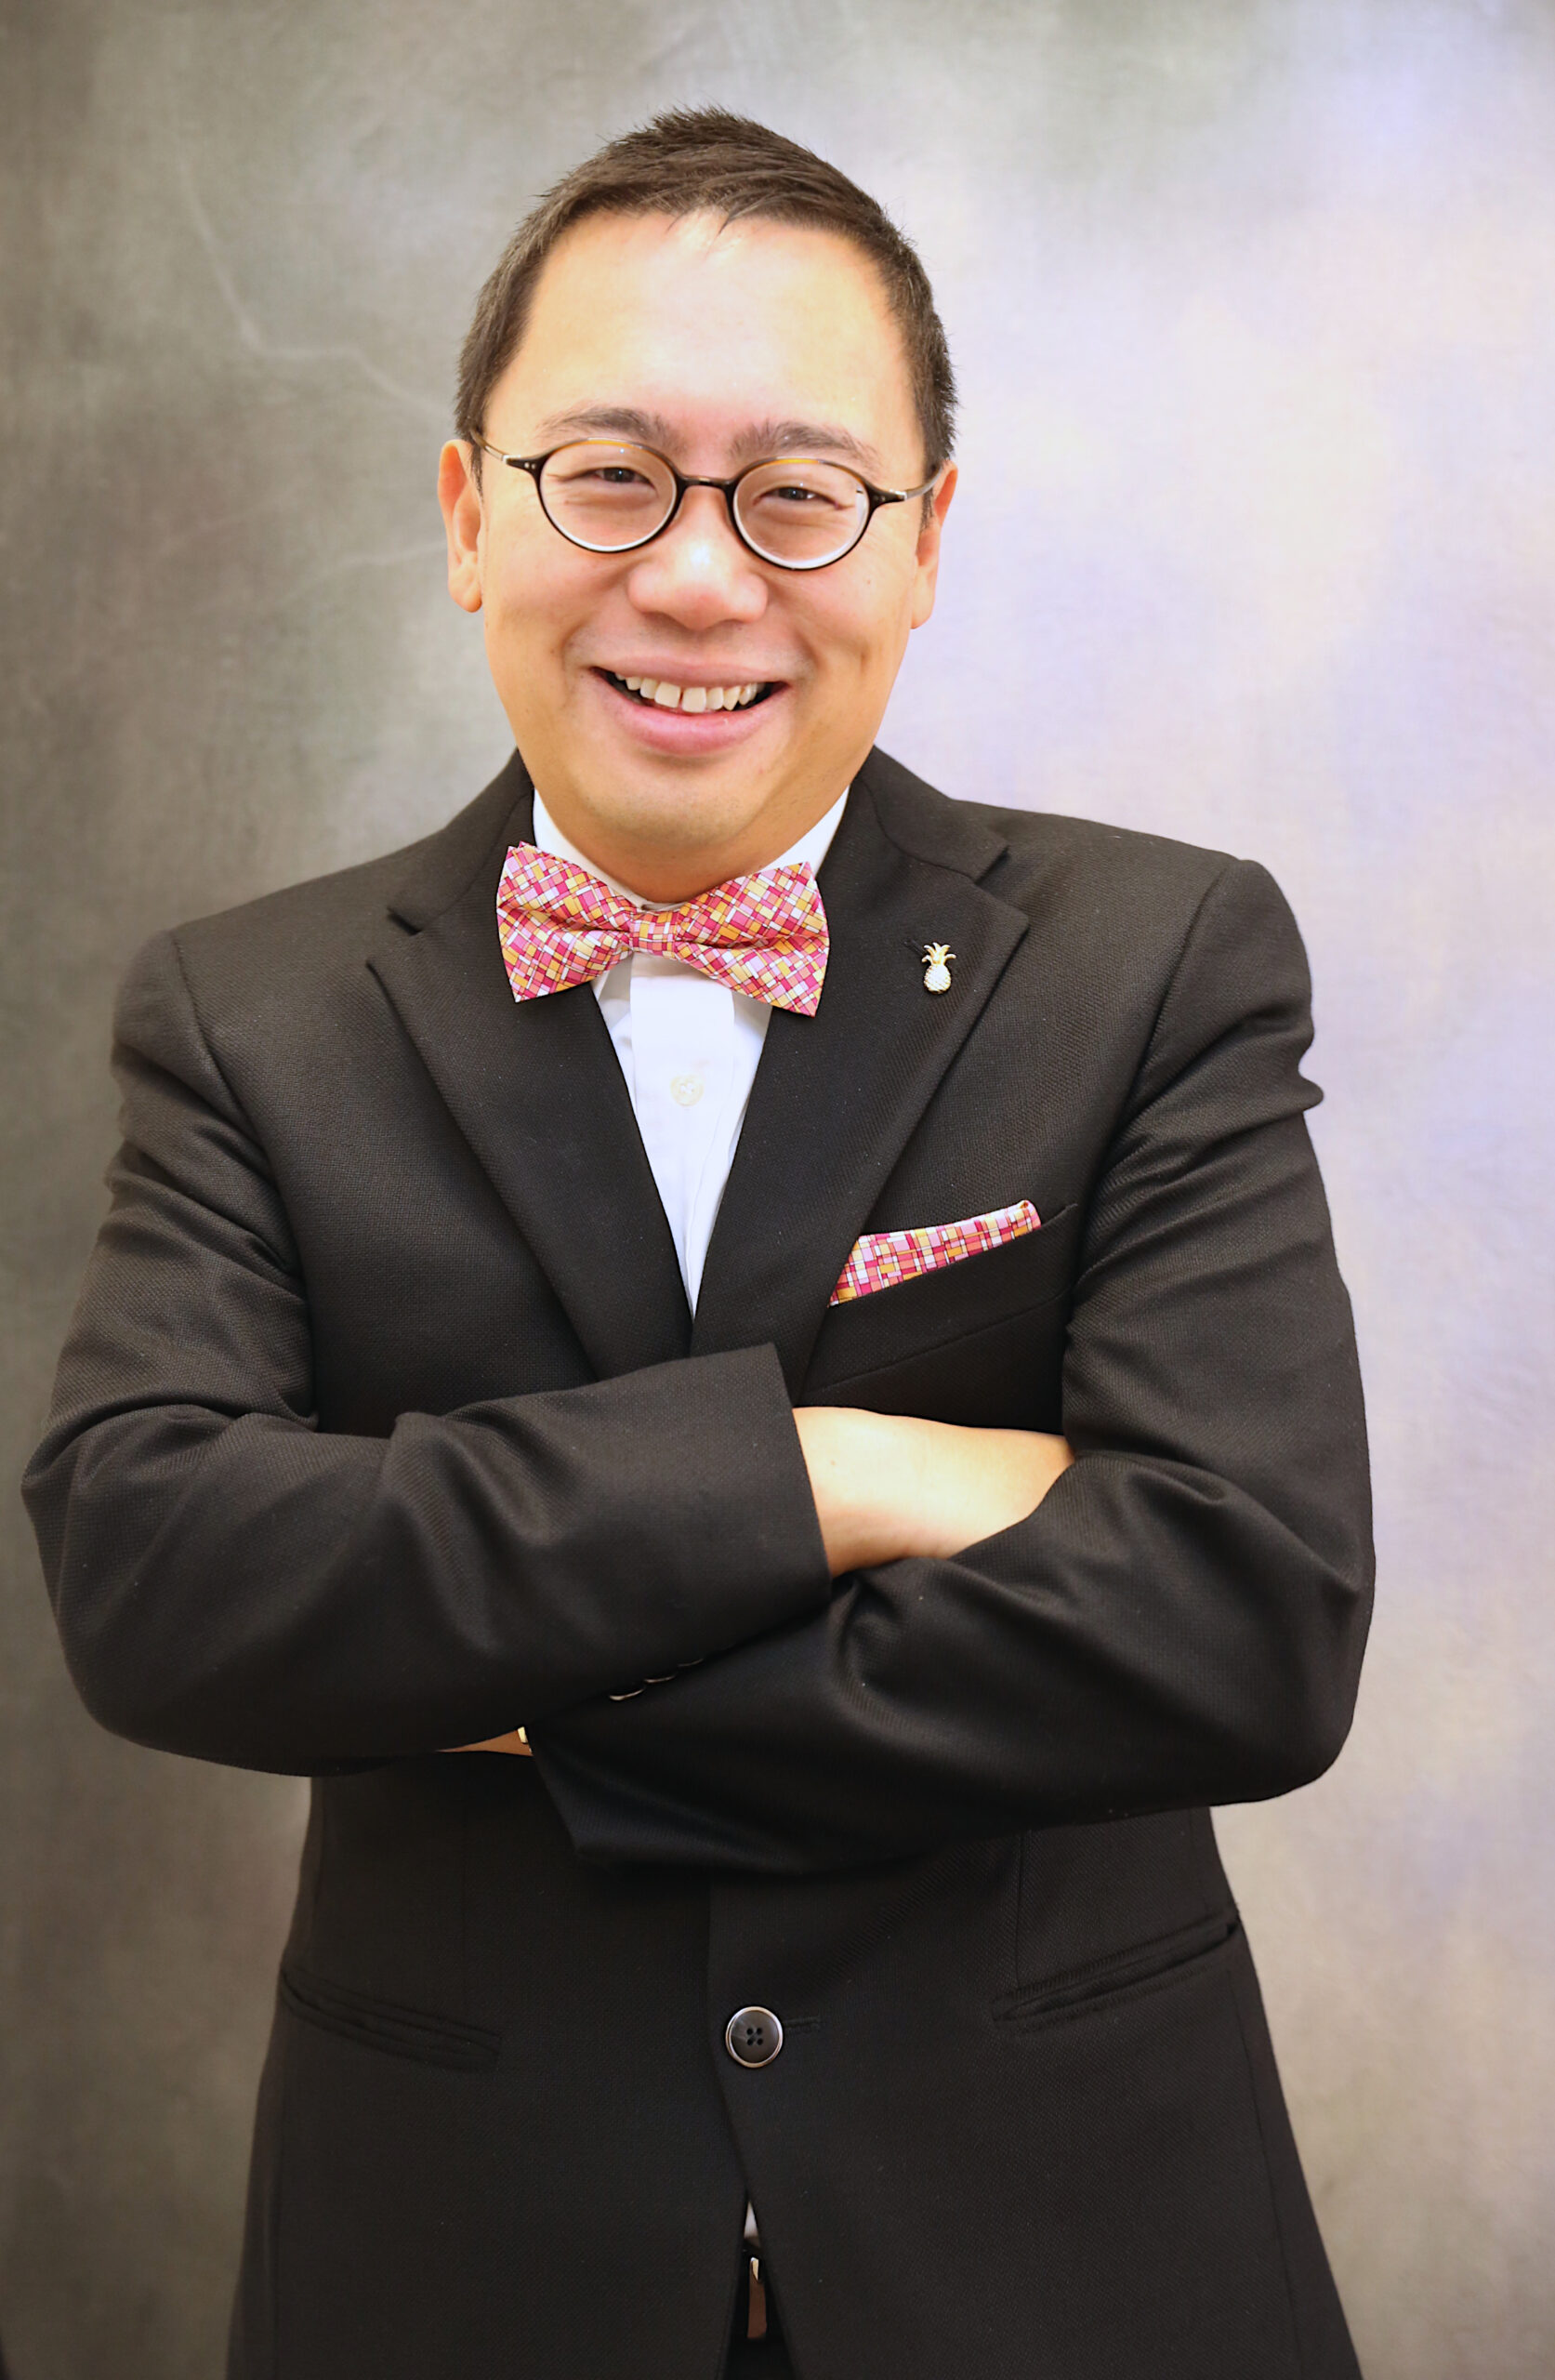 TISOH announced that Executive Director Timothy M. Lam has been named president of the Foundation of the National Association for Catering and Events NACE.